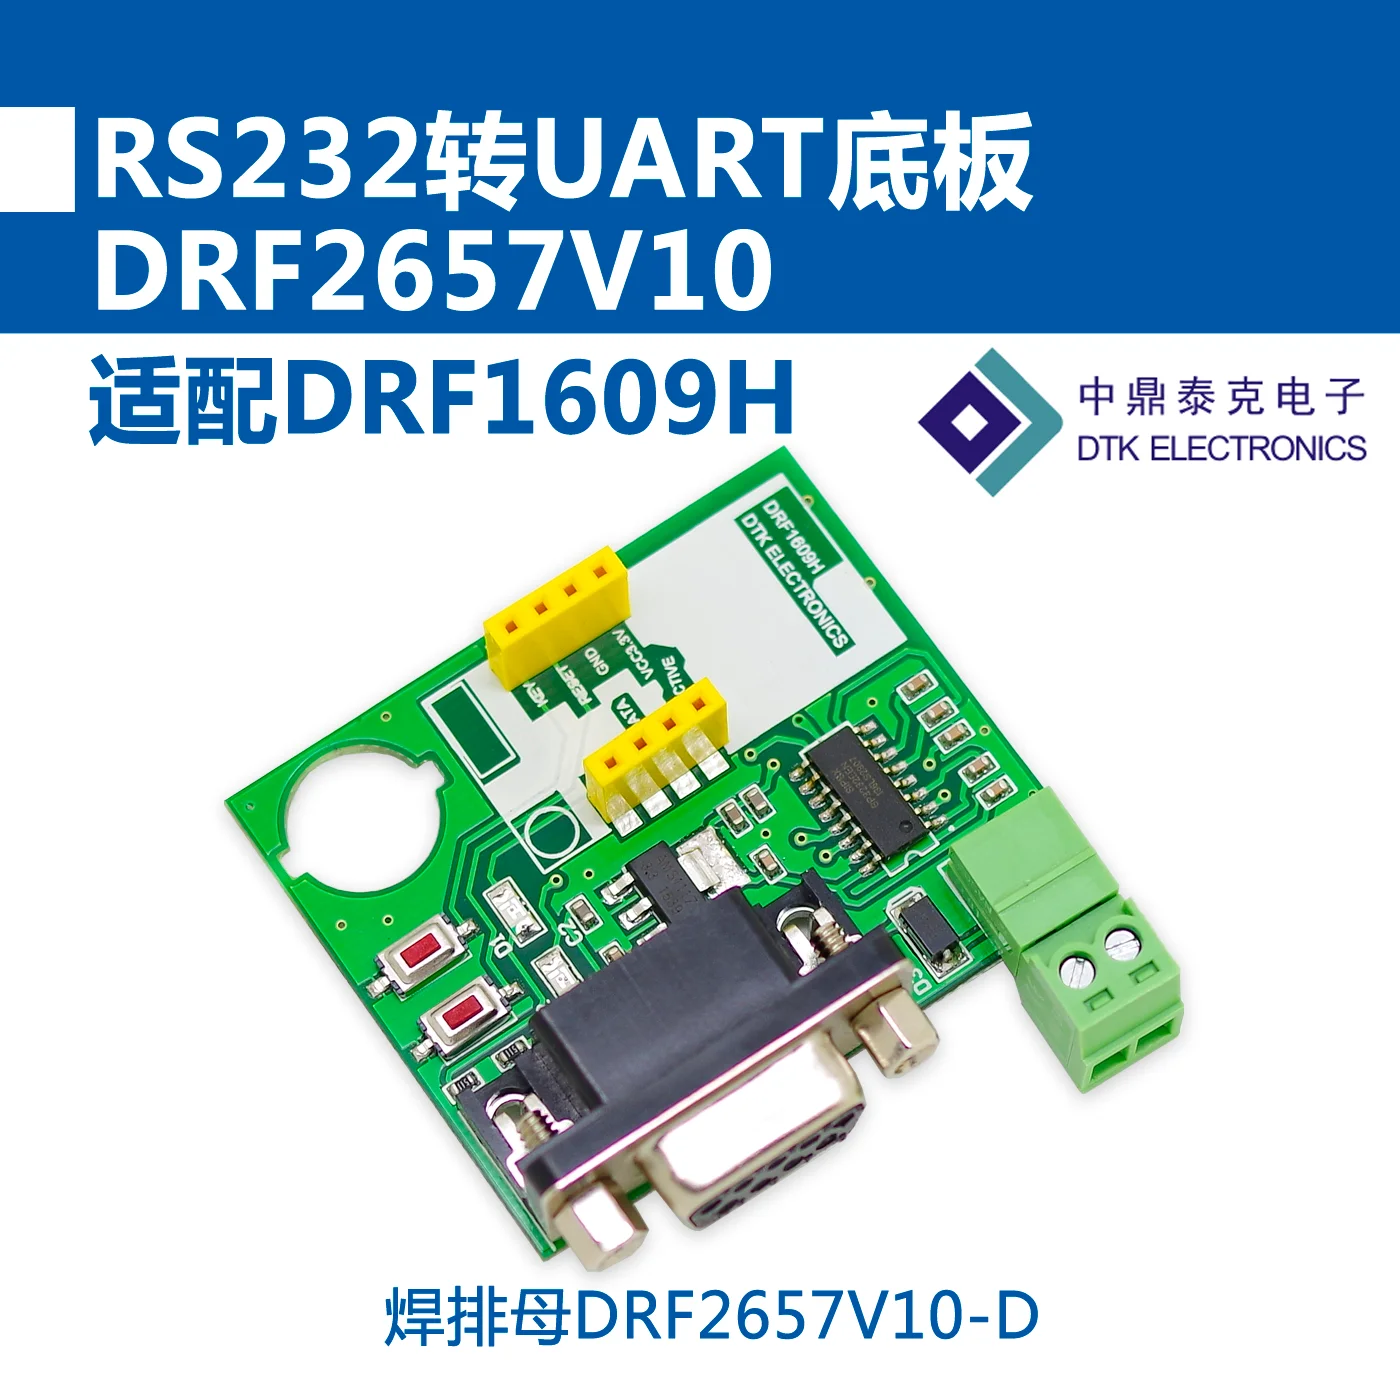 

RS232 to UART Backplane, RS232 Adapter Board, Suitable for DRF1609H Module